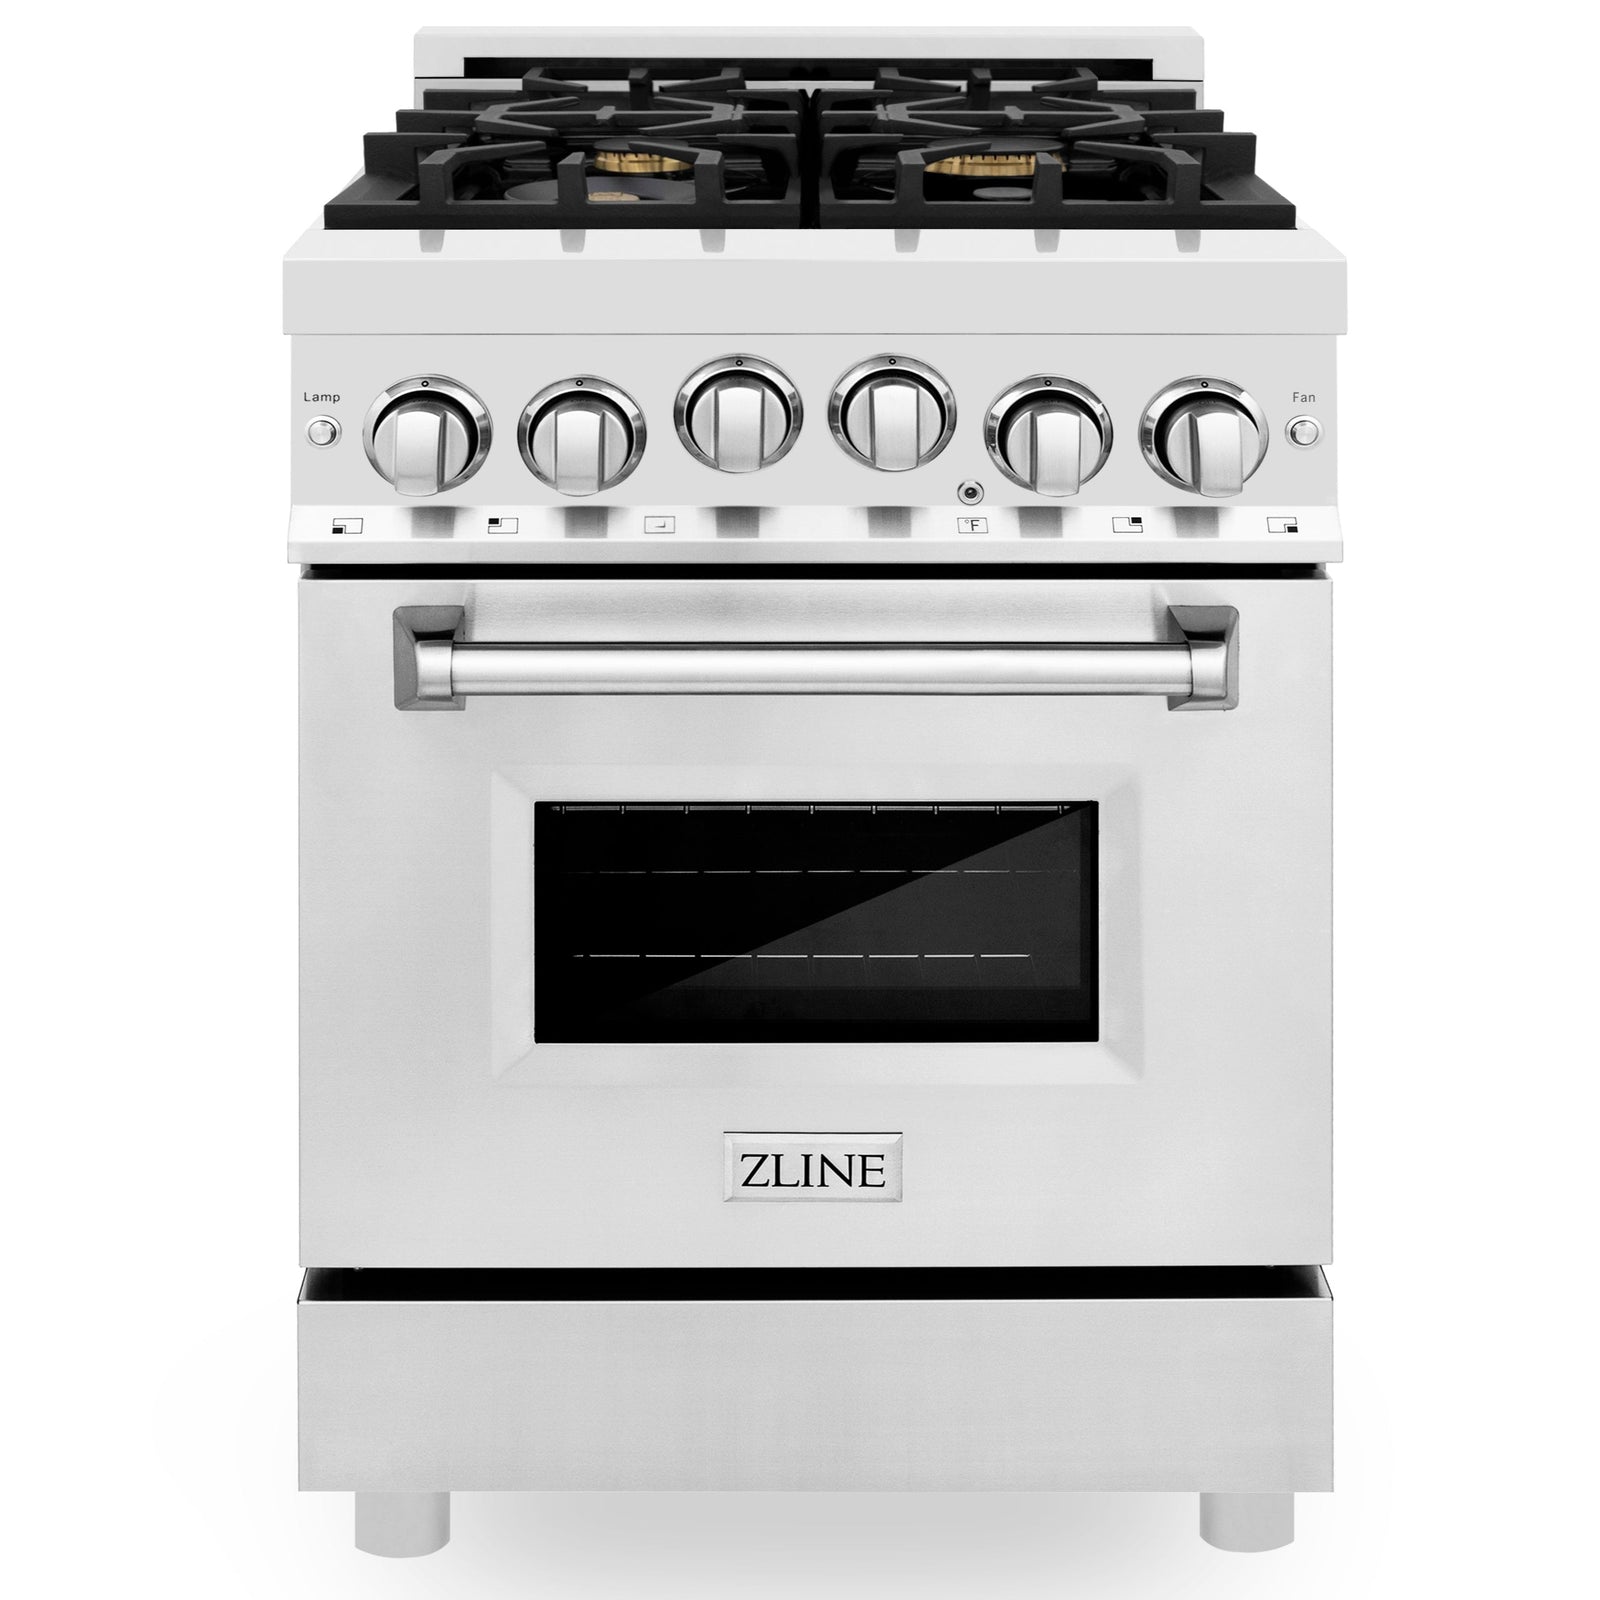 ZLINE 24 Inch 2.8 cu. ft. Range with Gas Stove and Gas Oven in Stainless Steel with Brass Burners, RG-BR-24 - Smart Kitchen Lab